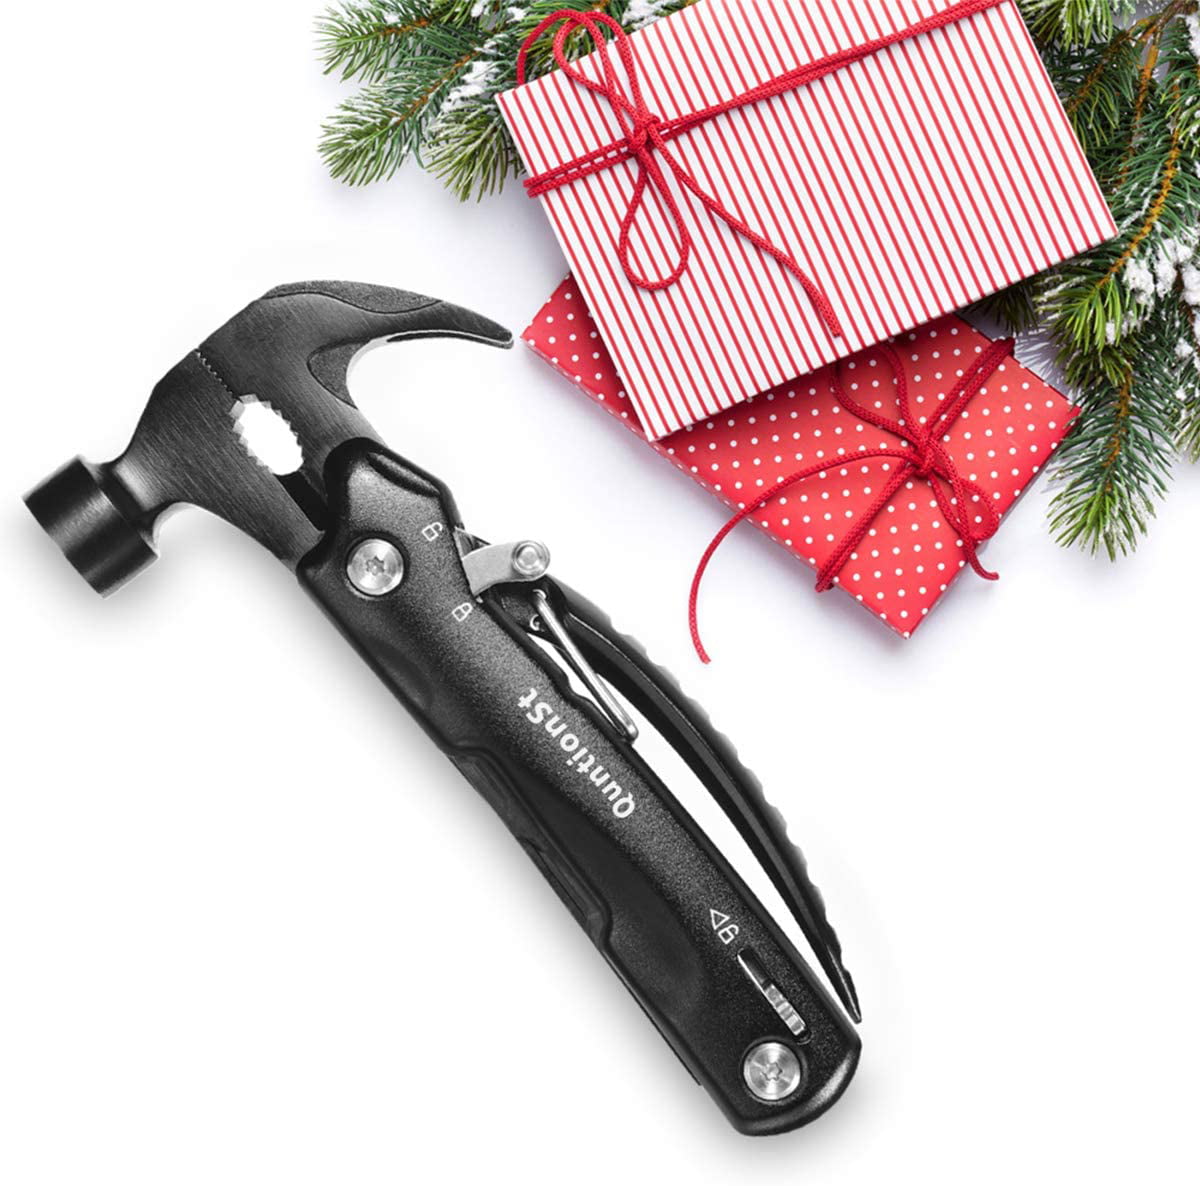 Father's Day Gifts for Dad, IFKOO Hammer 12 in1 Multitool, Gifts for Men Him,  Gifts for Dad Who Have Everything, Gifts for Dad Who Want Nothing, Small  Gadget for Dad Men 